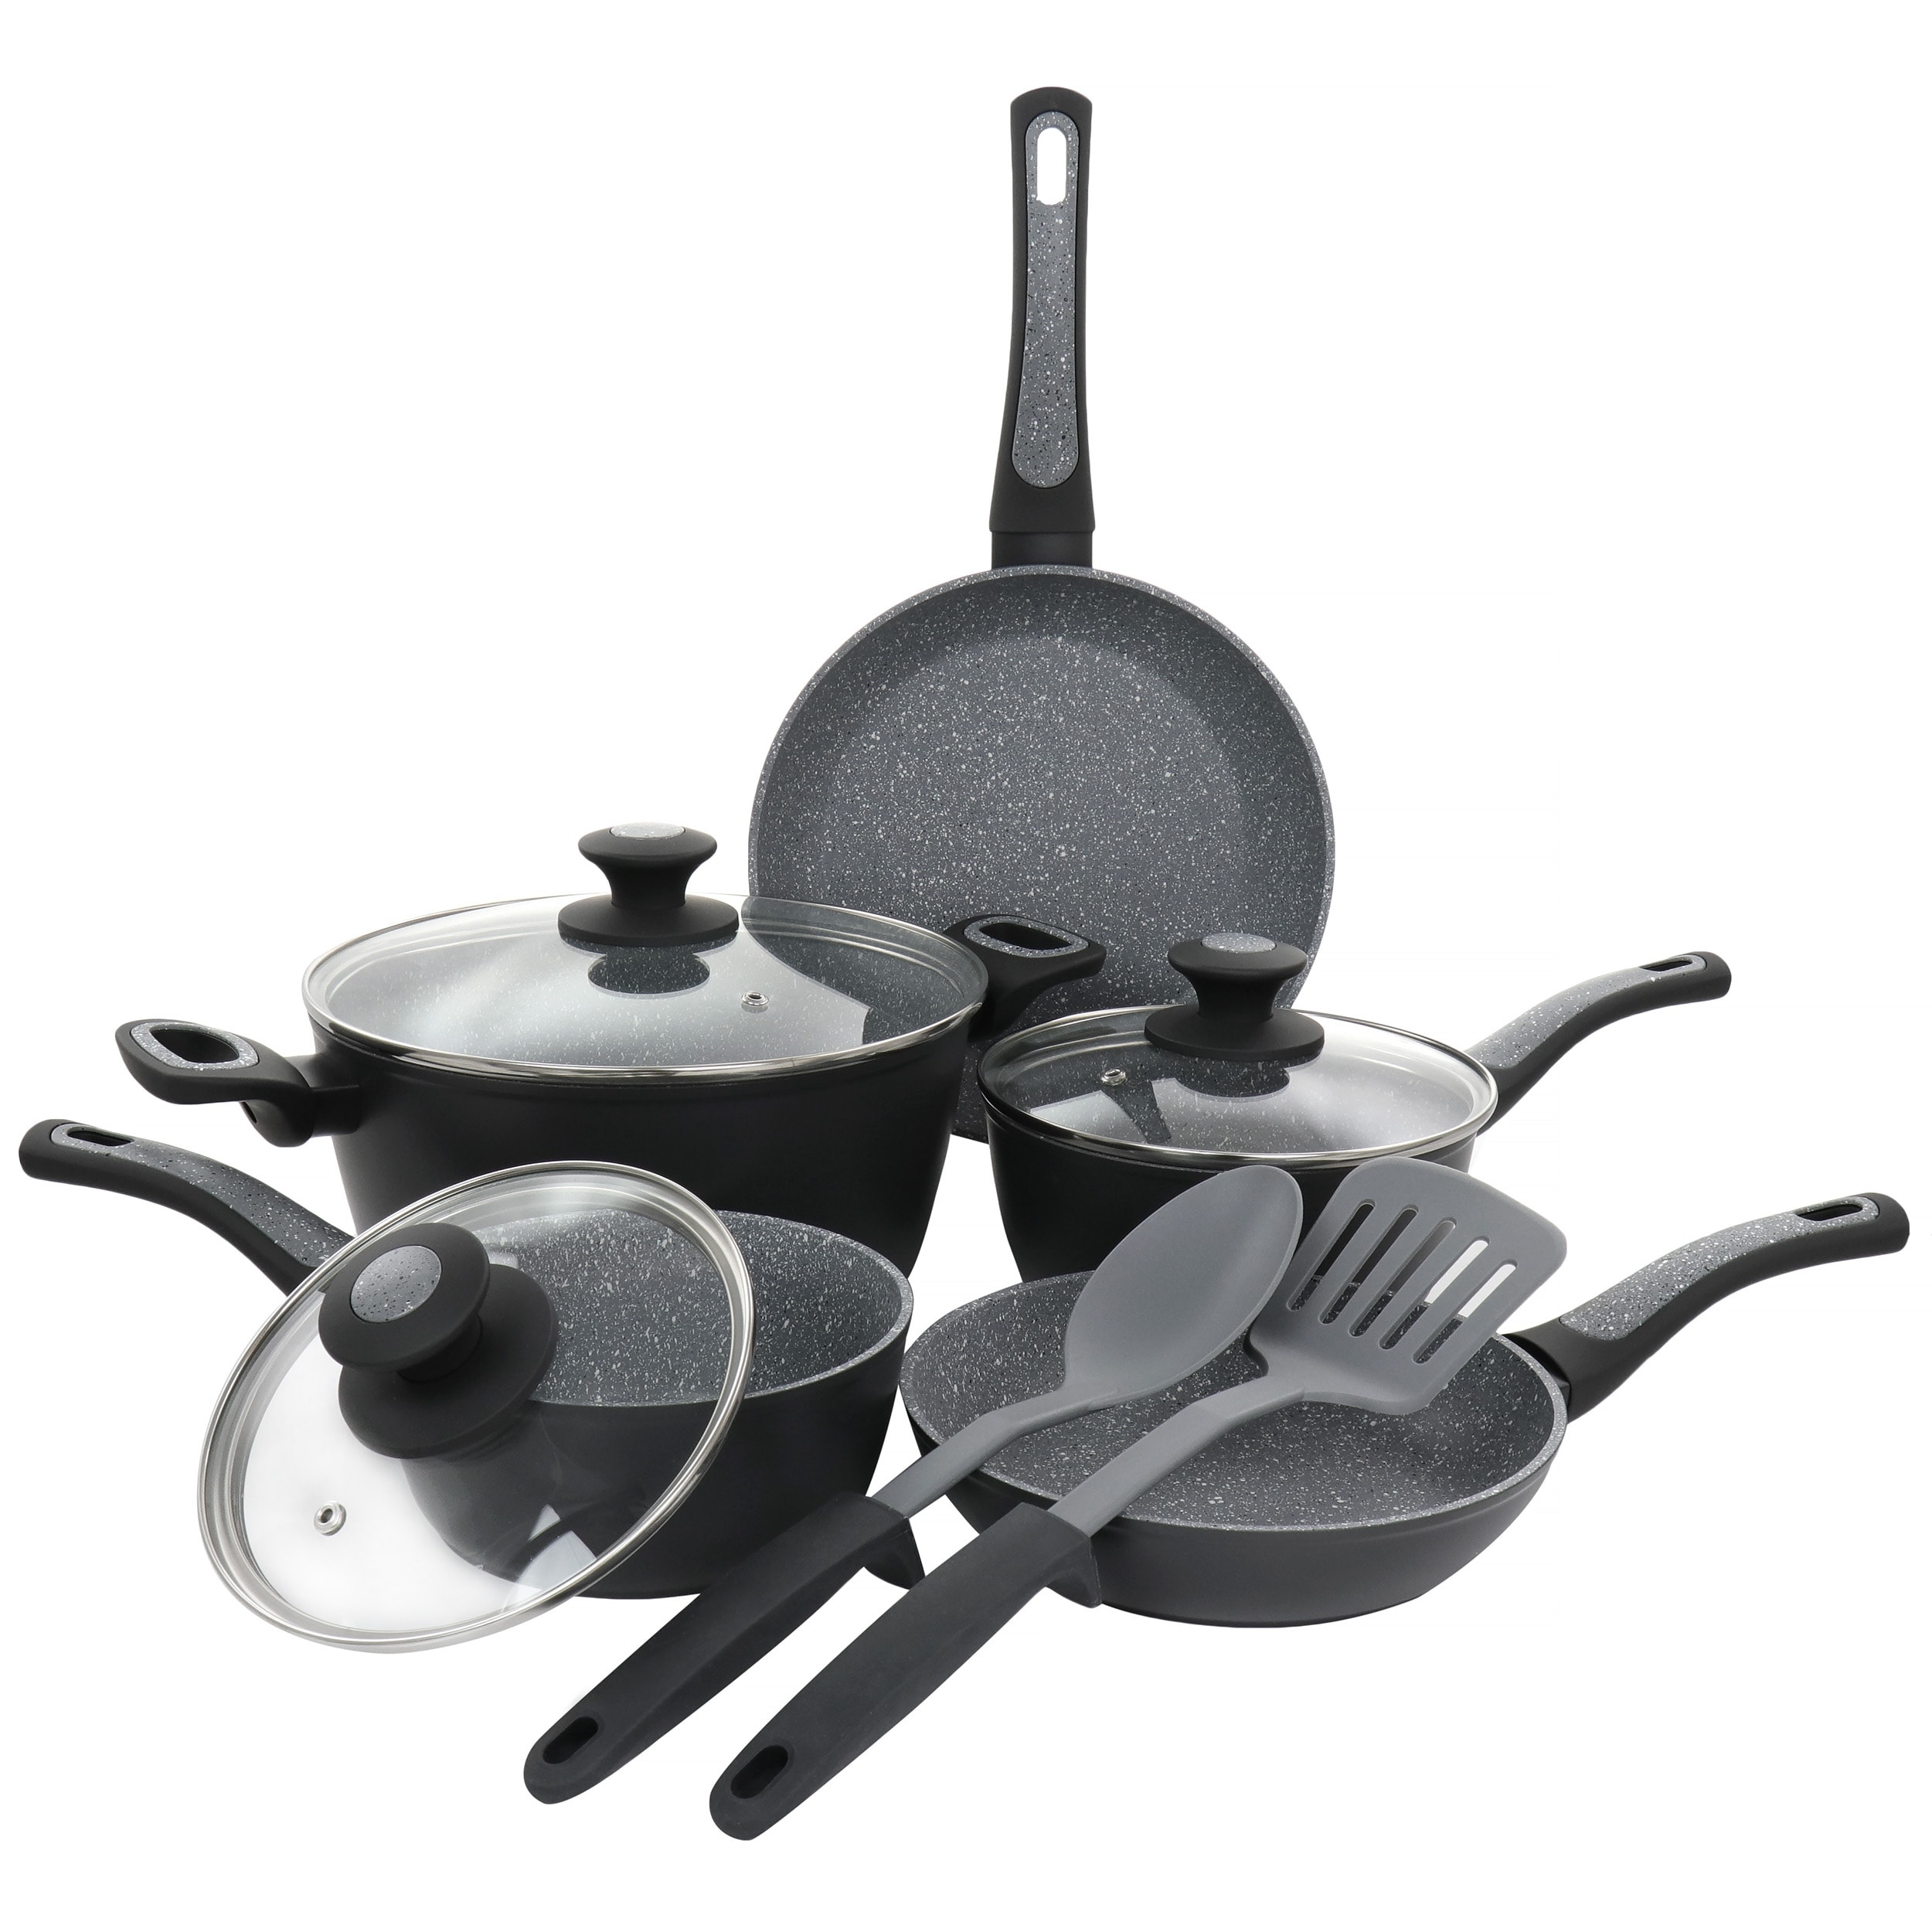 https://ak1.ostkcdn.com/images/products/is/images/direct/9d94a50eda7c4d7f5e1ba05cc3e69aa5d3657d9d/Oster-10-Piece-Non-Stick-Aluminum-Cookware-Set-in-Black-and-Grey-Speckle.jpg